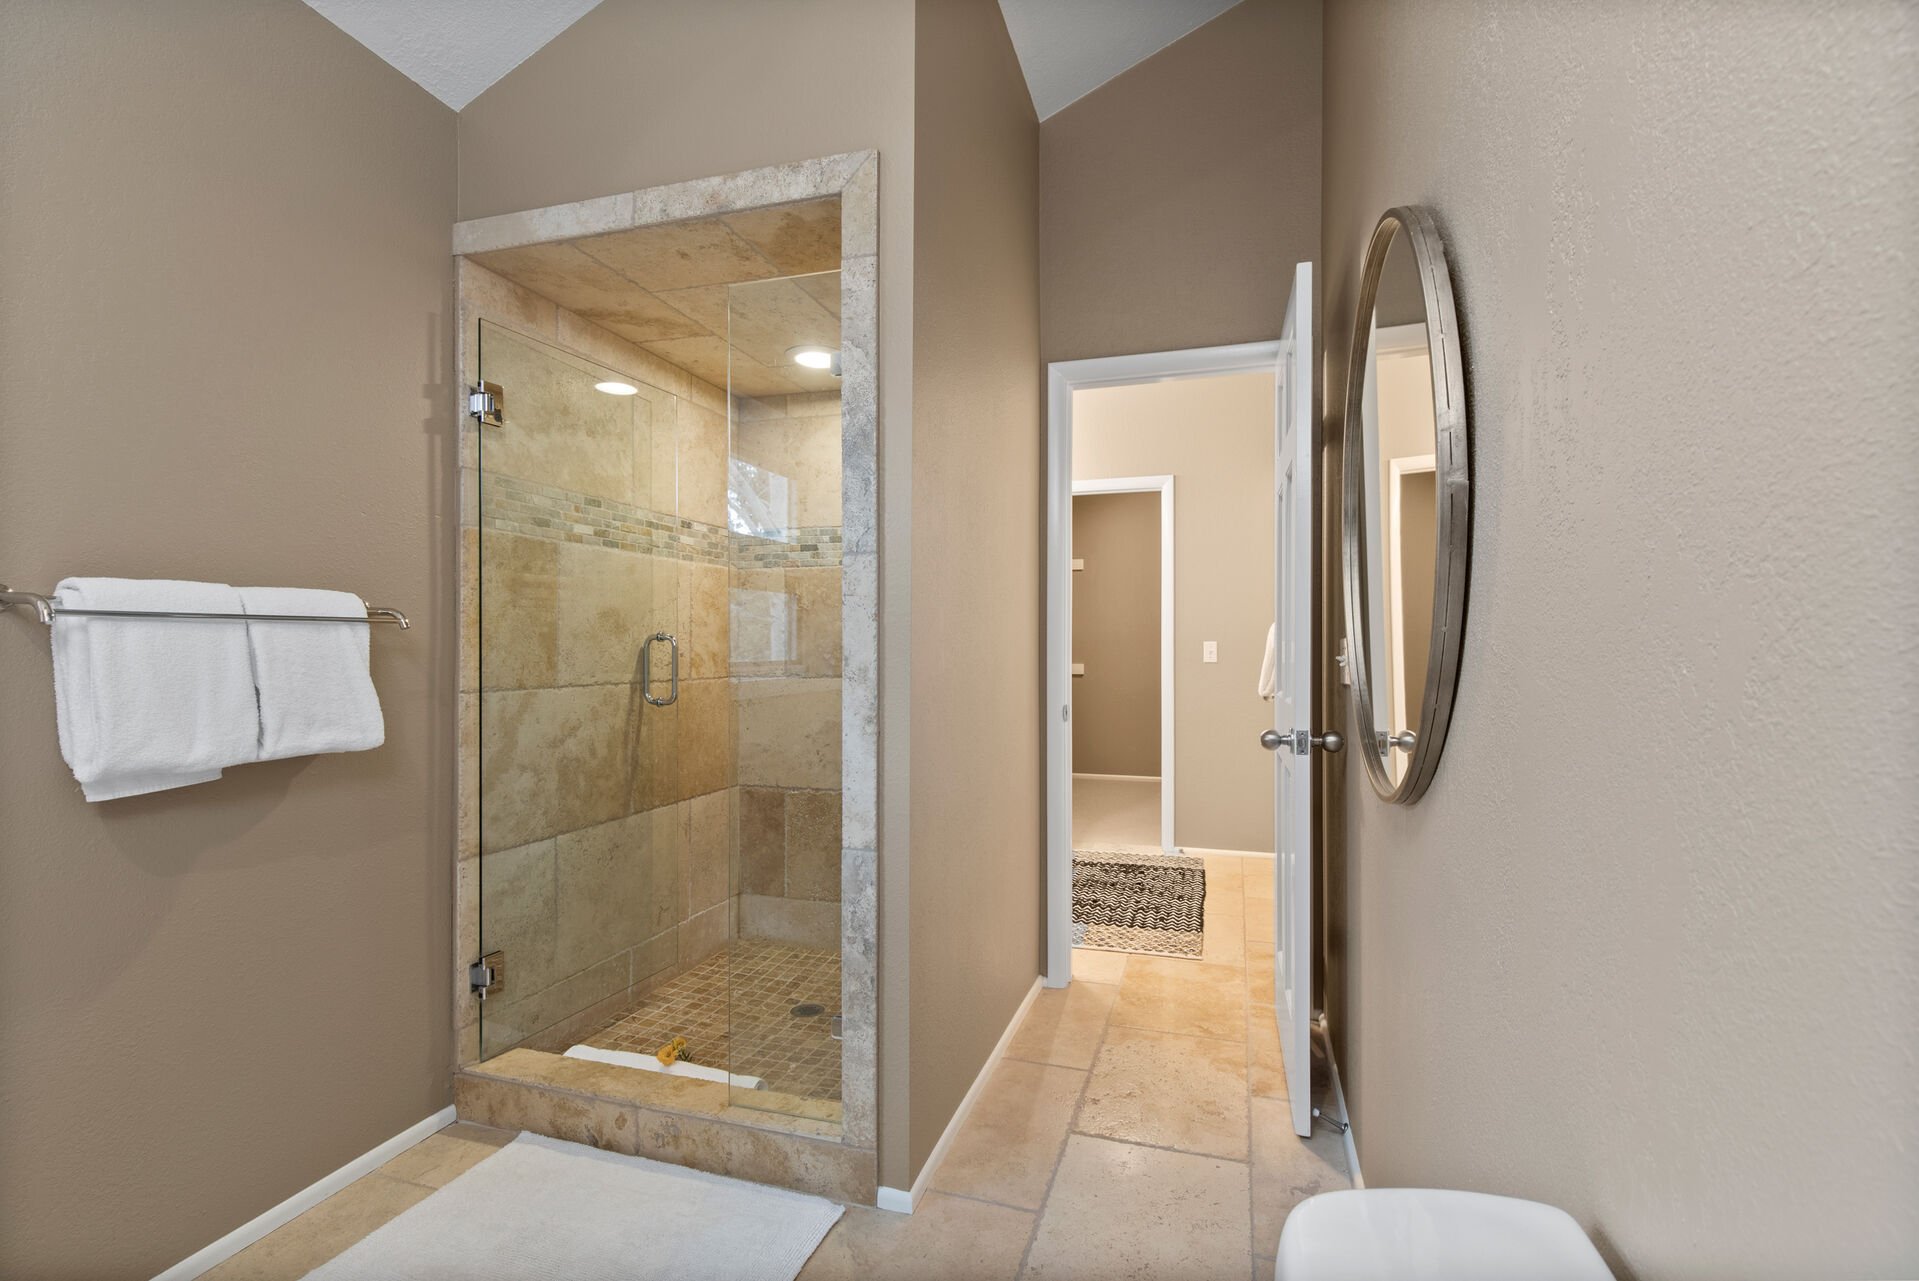 King size bed, walk-in closet, private balcony, and private bath with double sinks, tile shower and separate over-sized soaking tub